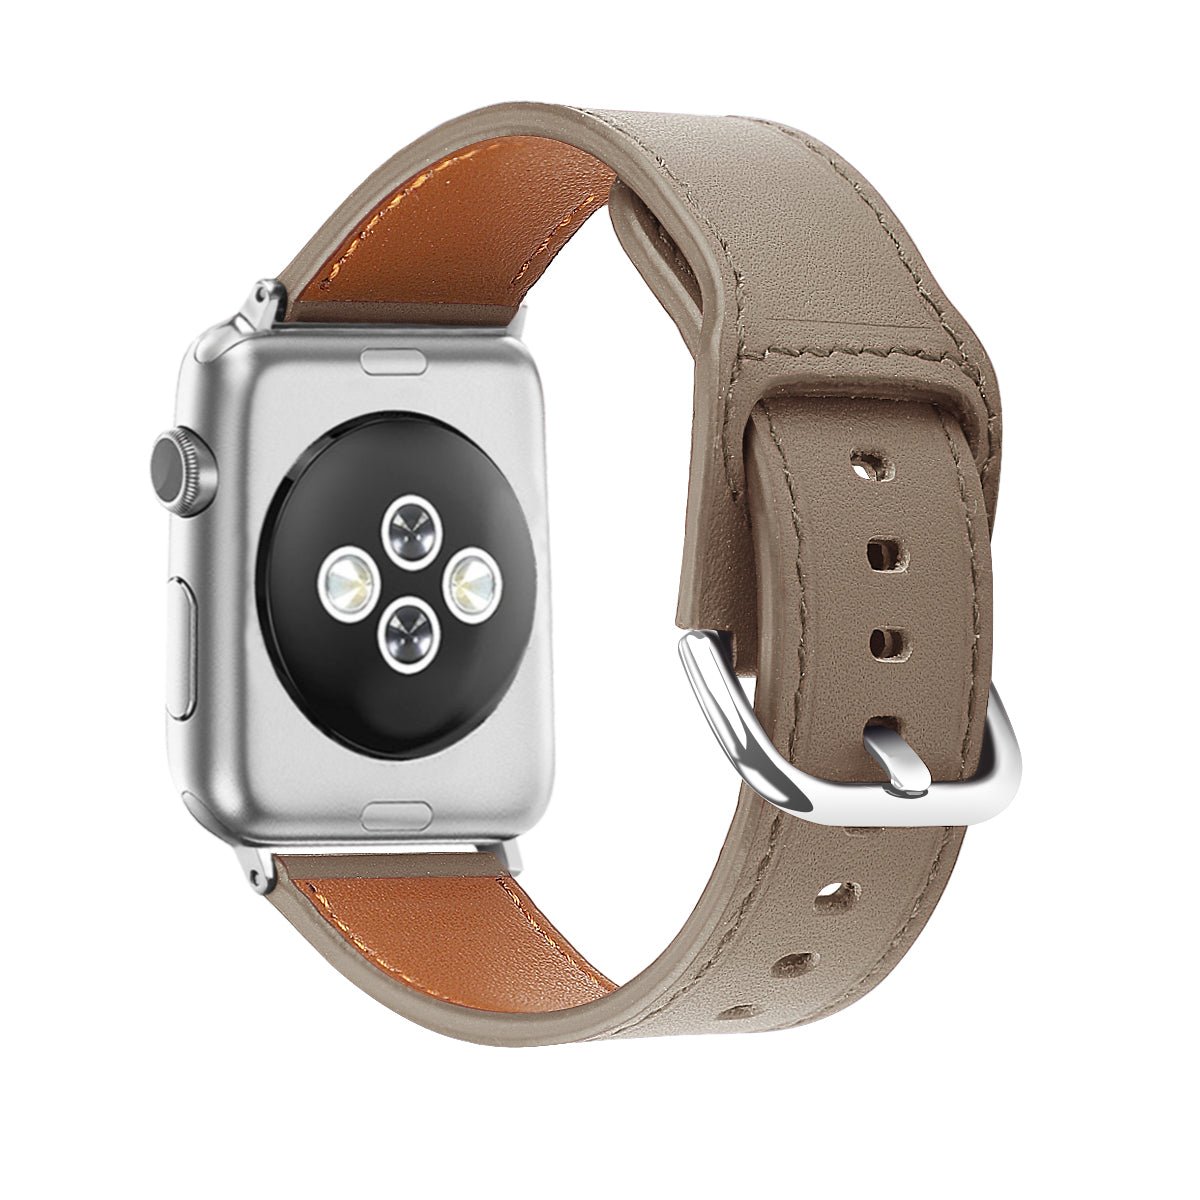 ALK Monaco Leather Band for Apple Watch in Taupe - Alk Designs